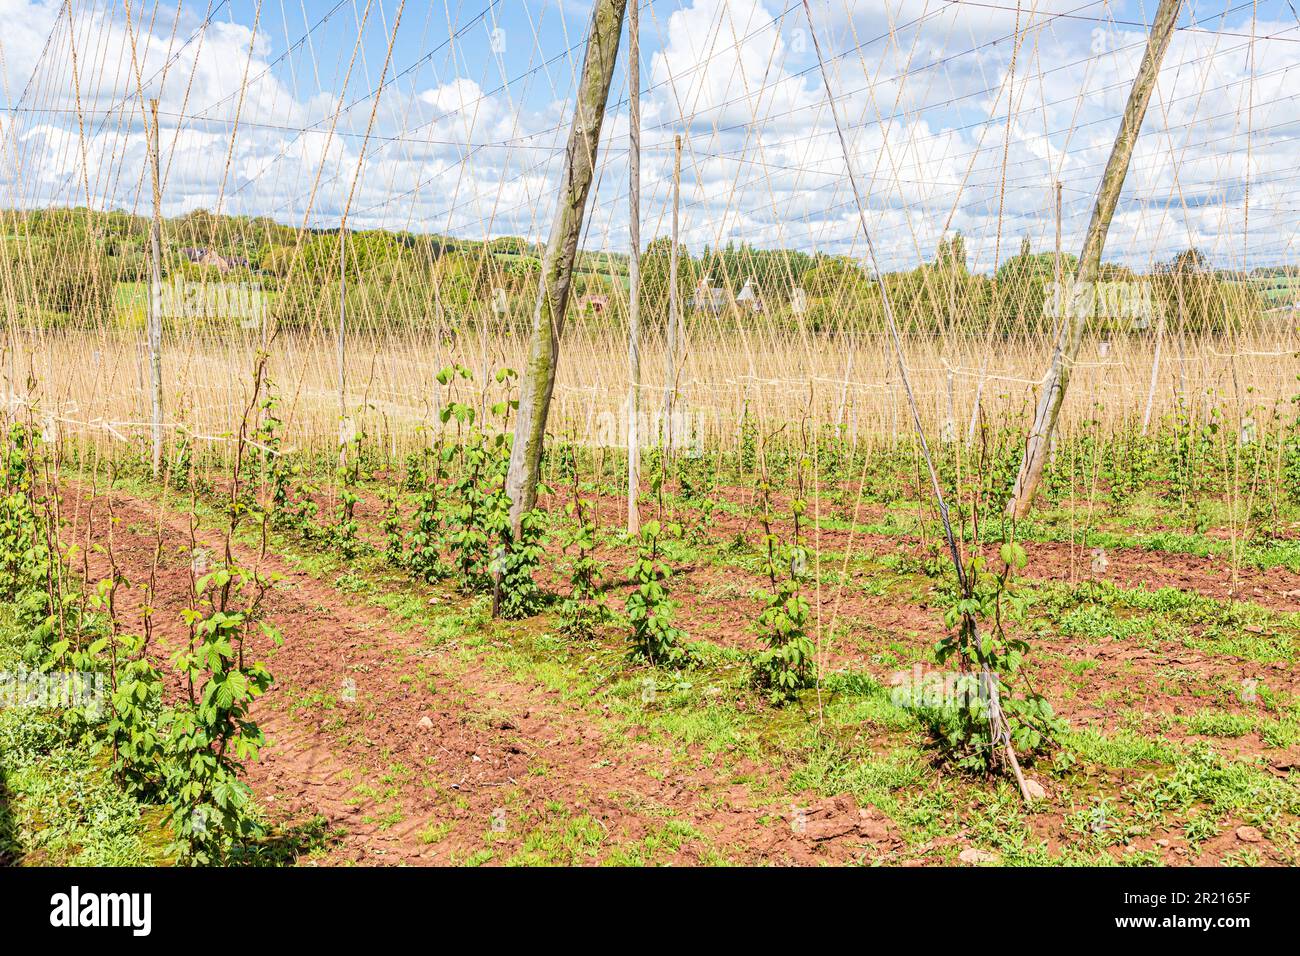 Hops (Humulus lupulus) growing  on strung hop trellis in a hop garden or hopyard near Acton Beauchamp in the Frome Valley, Herefordshire, England UK Stock Photo